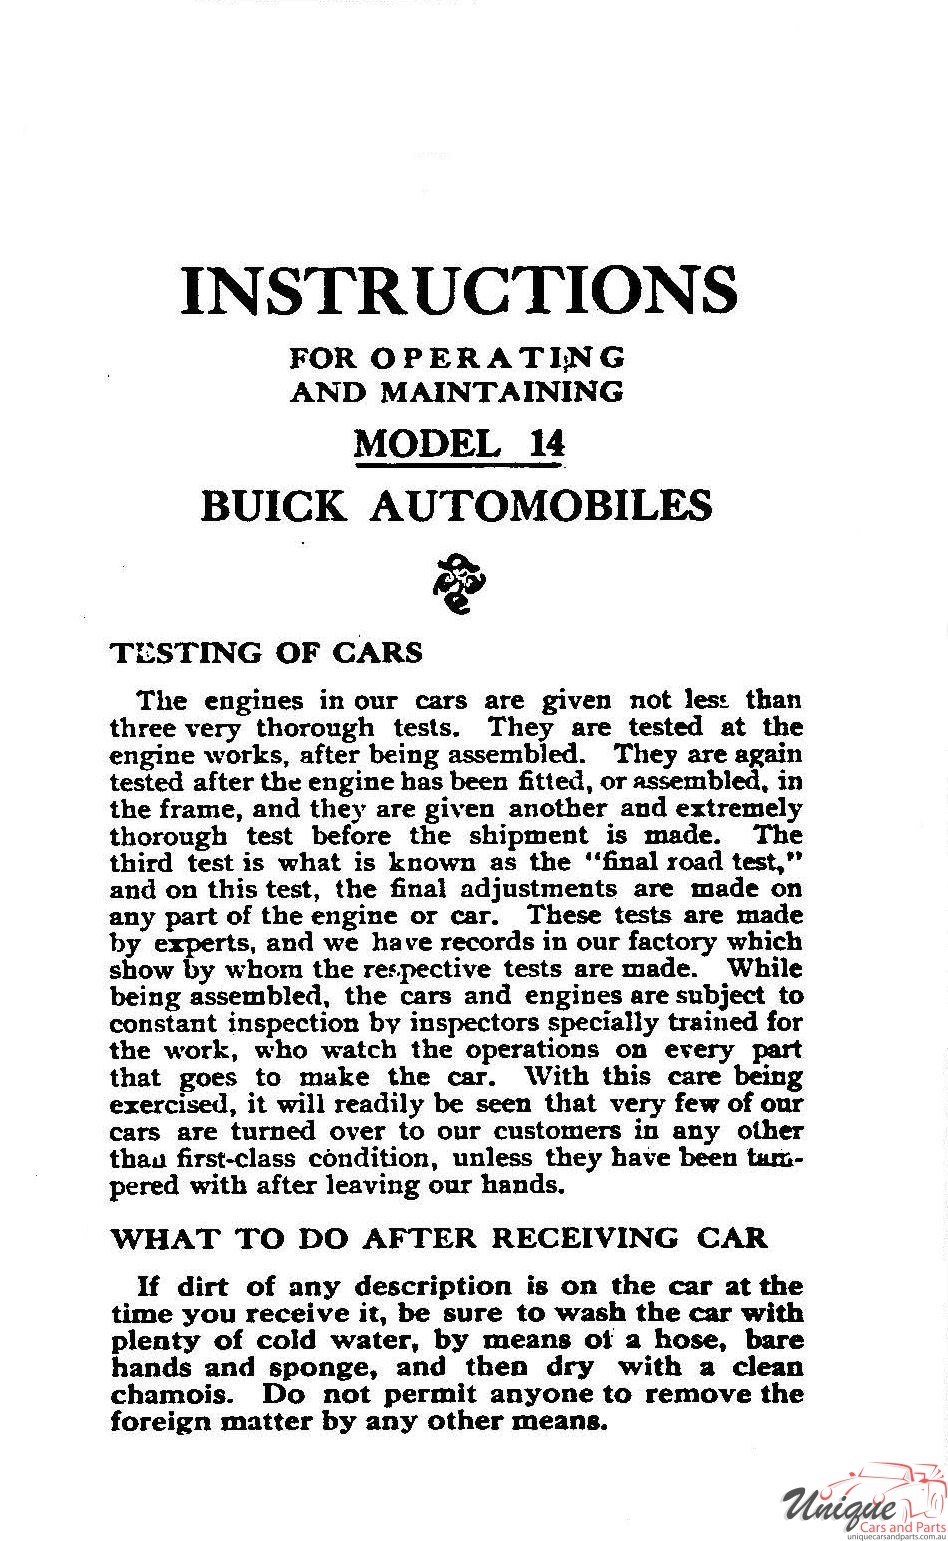 1910 Buick Model 14 Operating Instructions Page 3